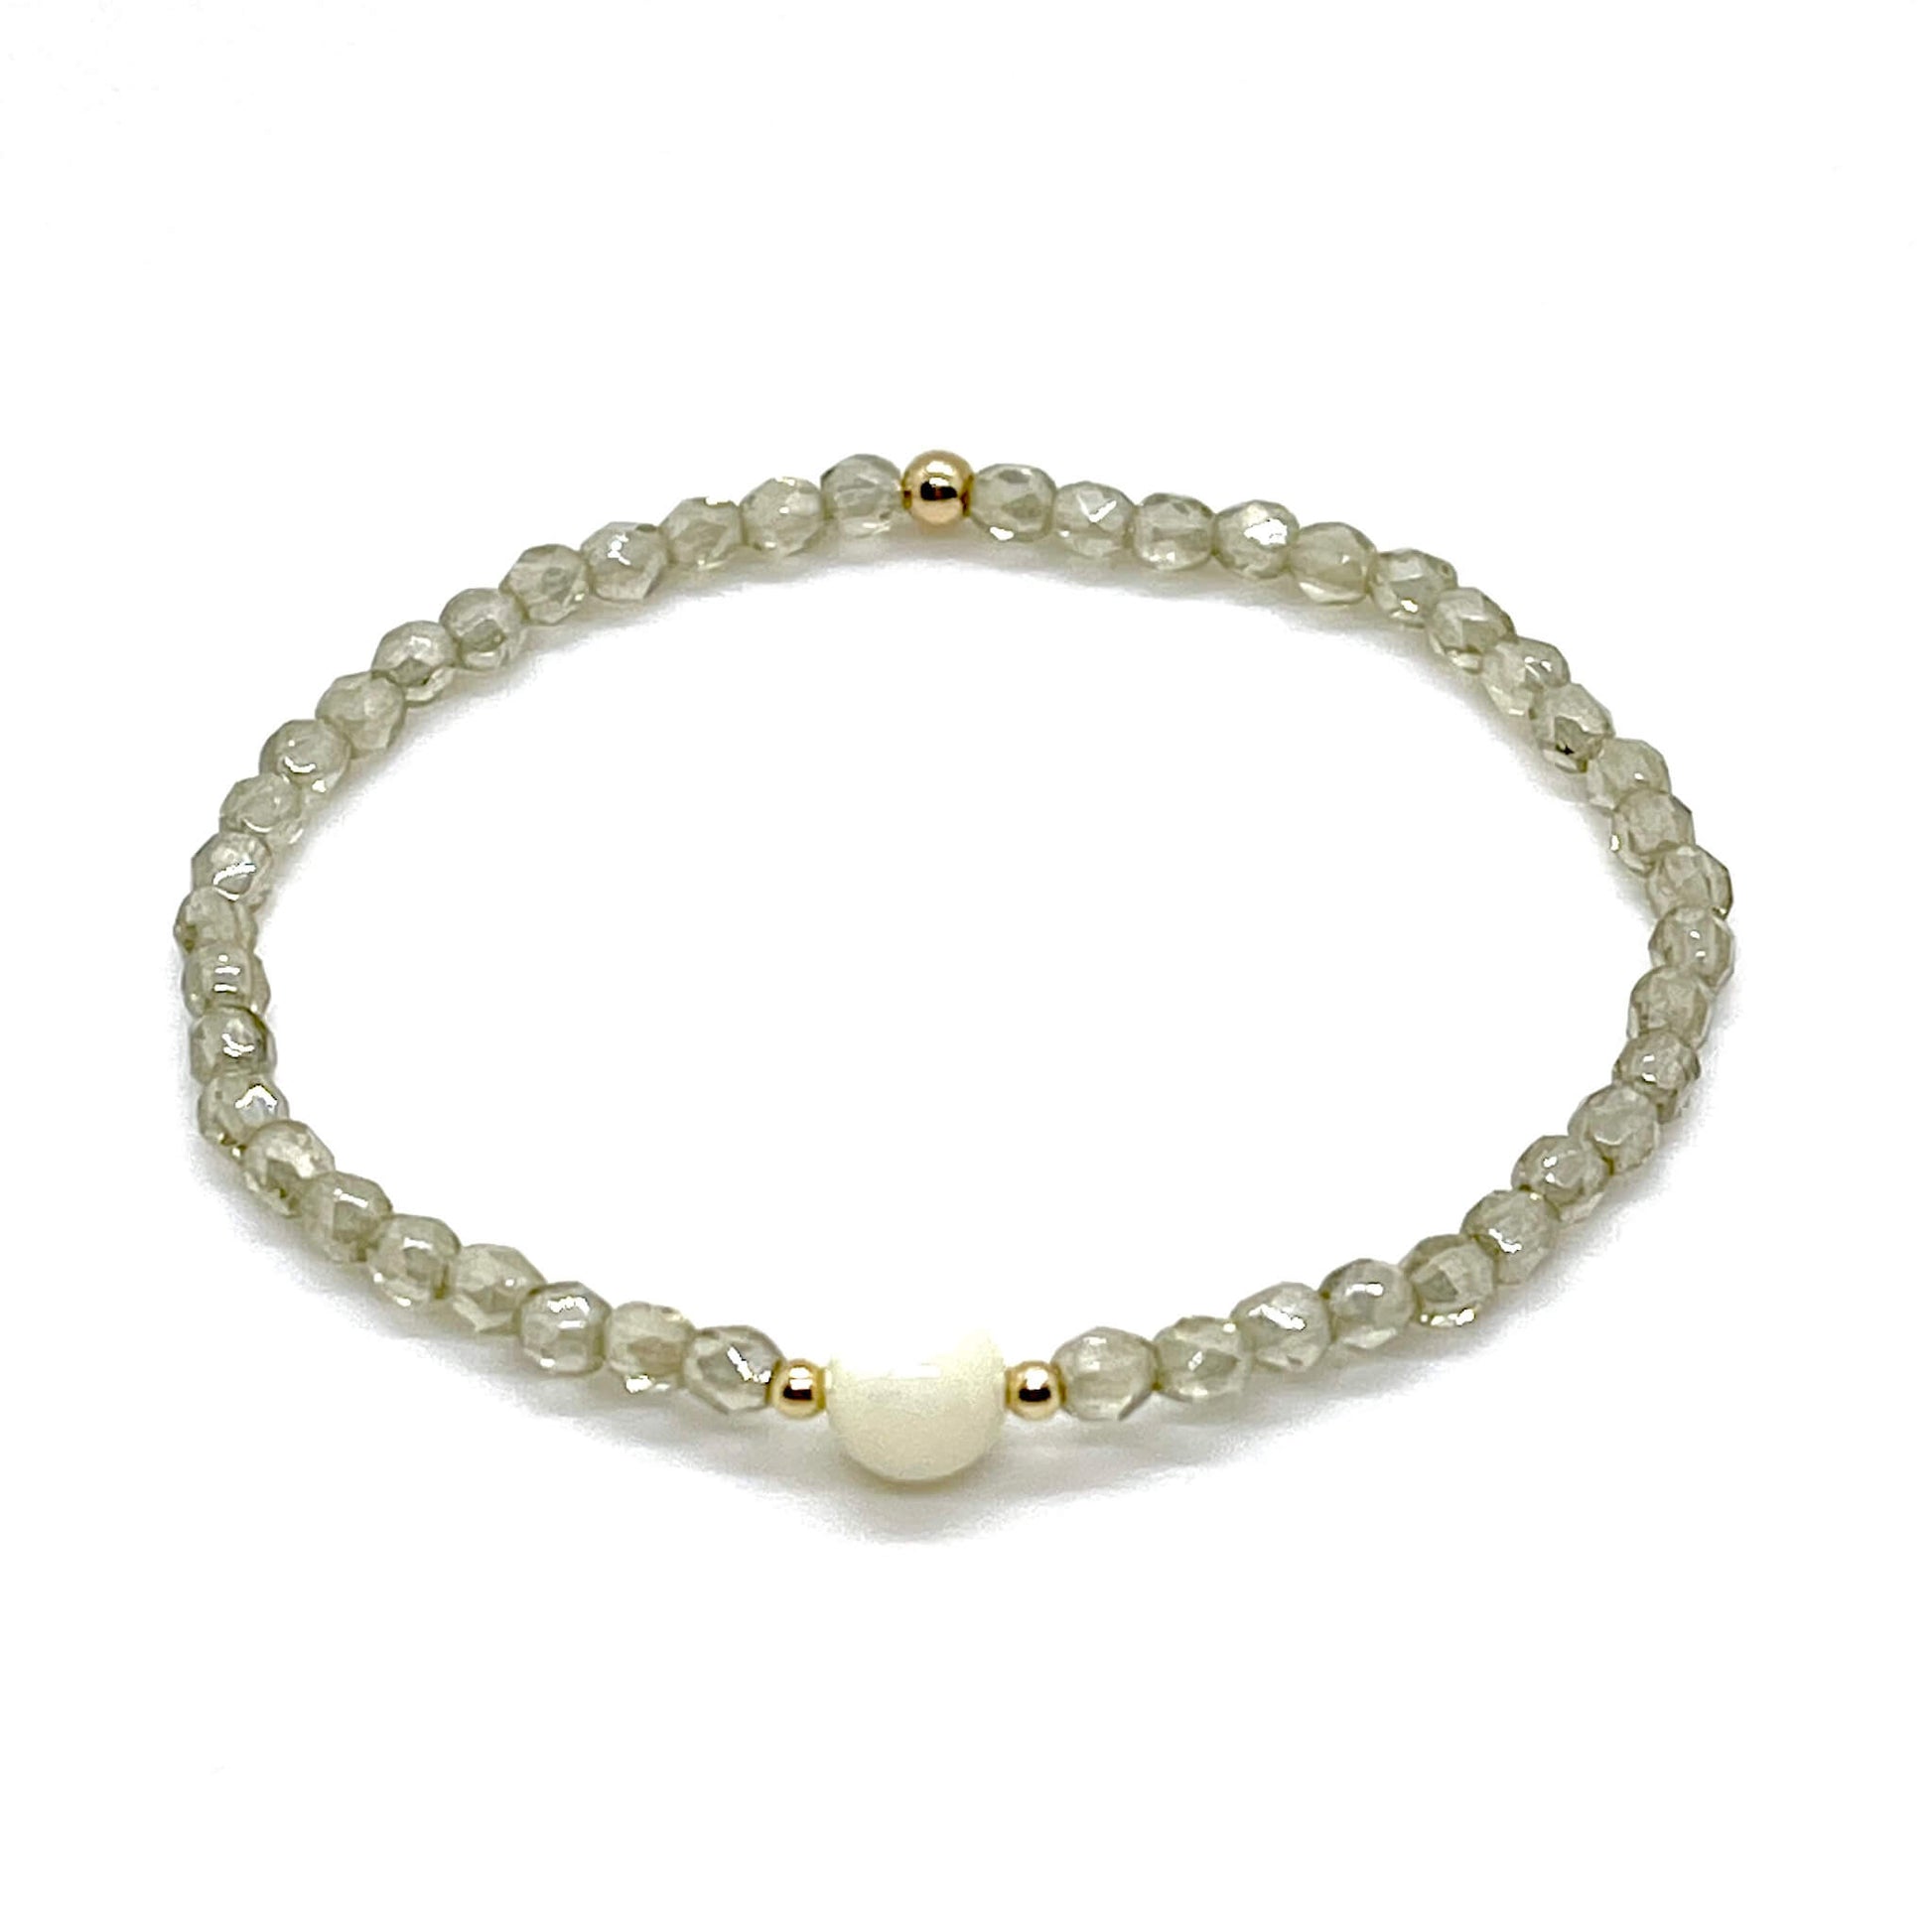 Grey-taupe crystal bracelet with a mother-of-pearl center bead and small gold accent beads.